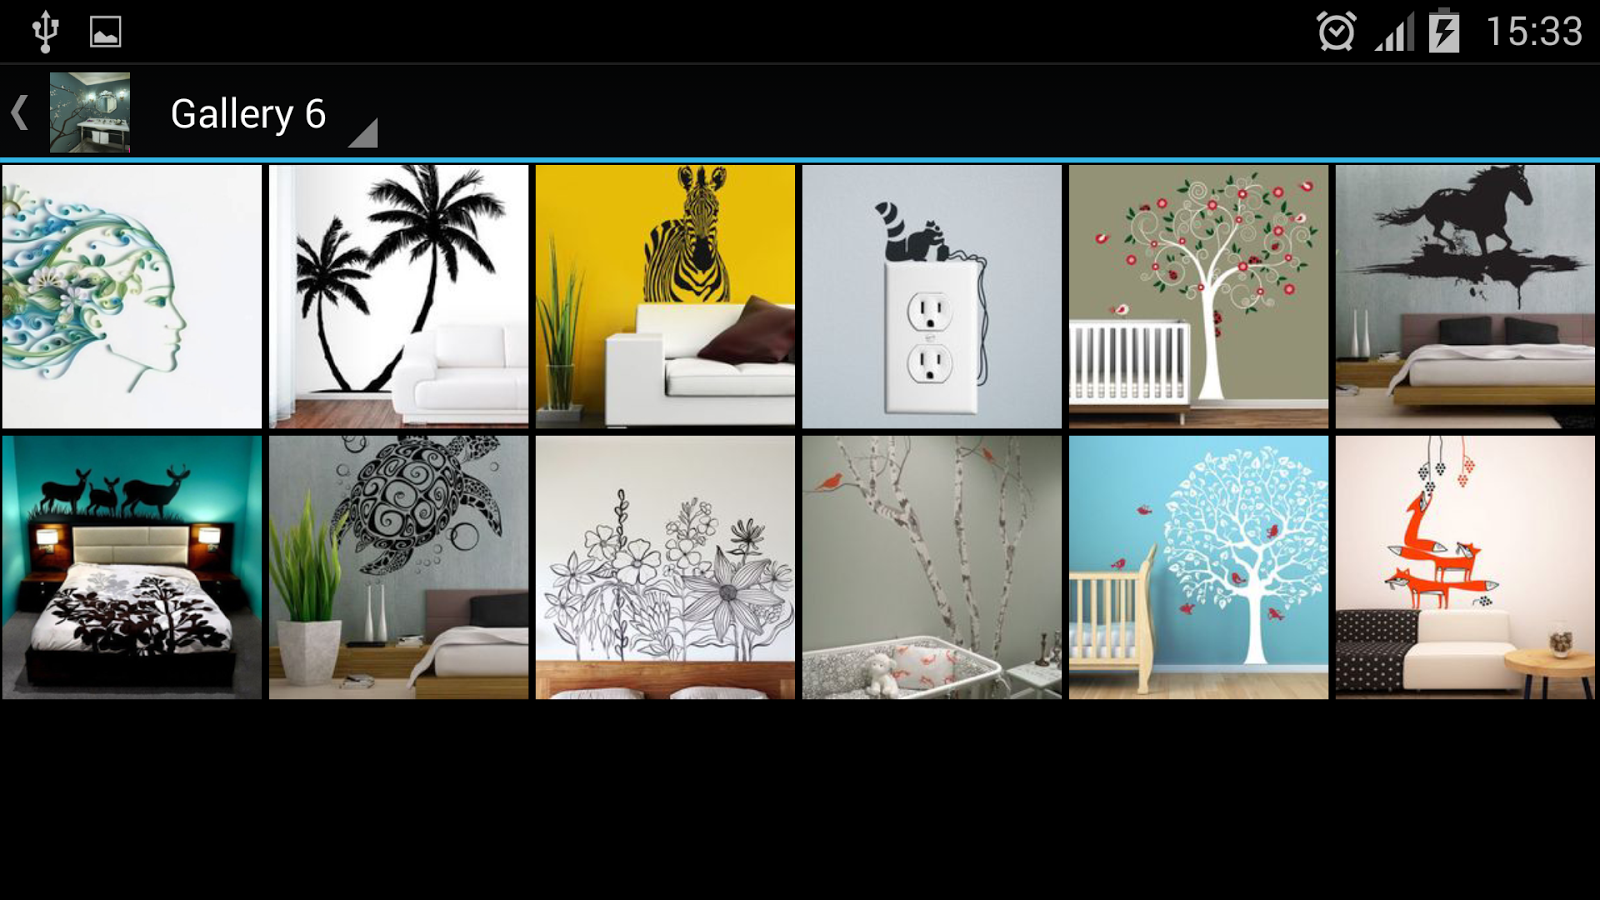  Wall  Stickers Decorations  Android Apps  on Google Play